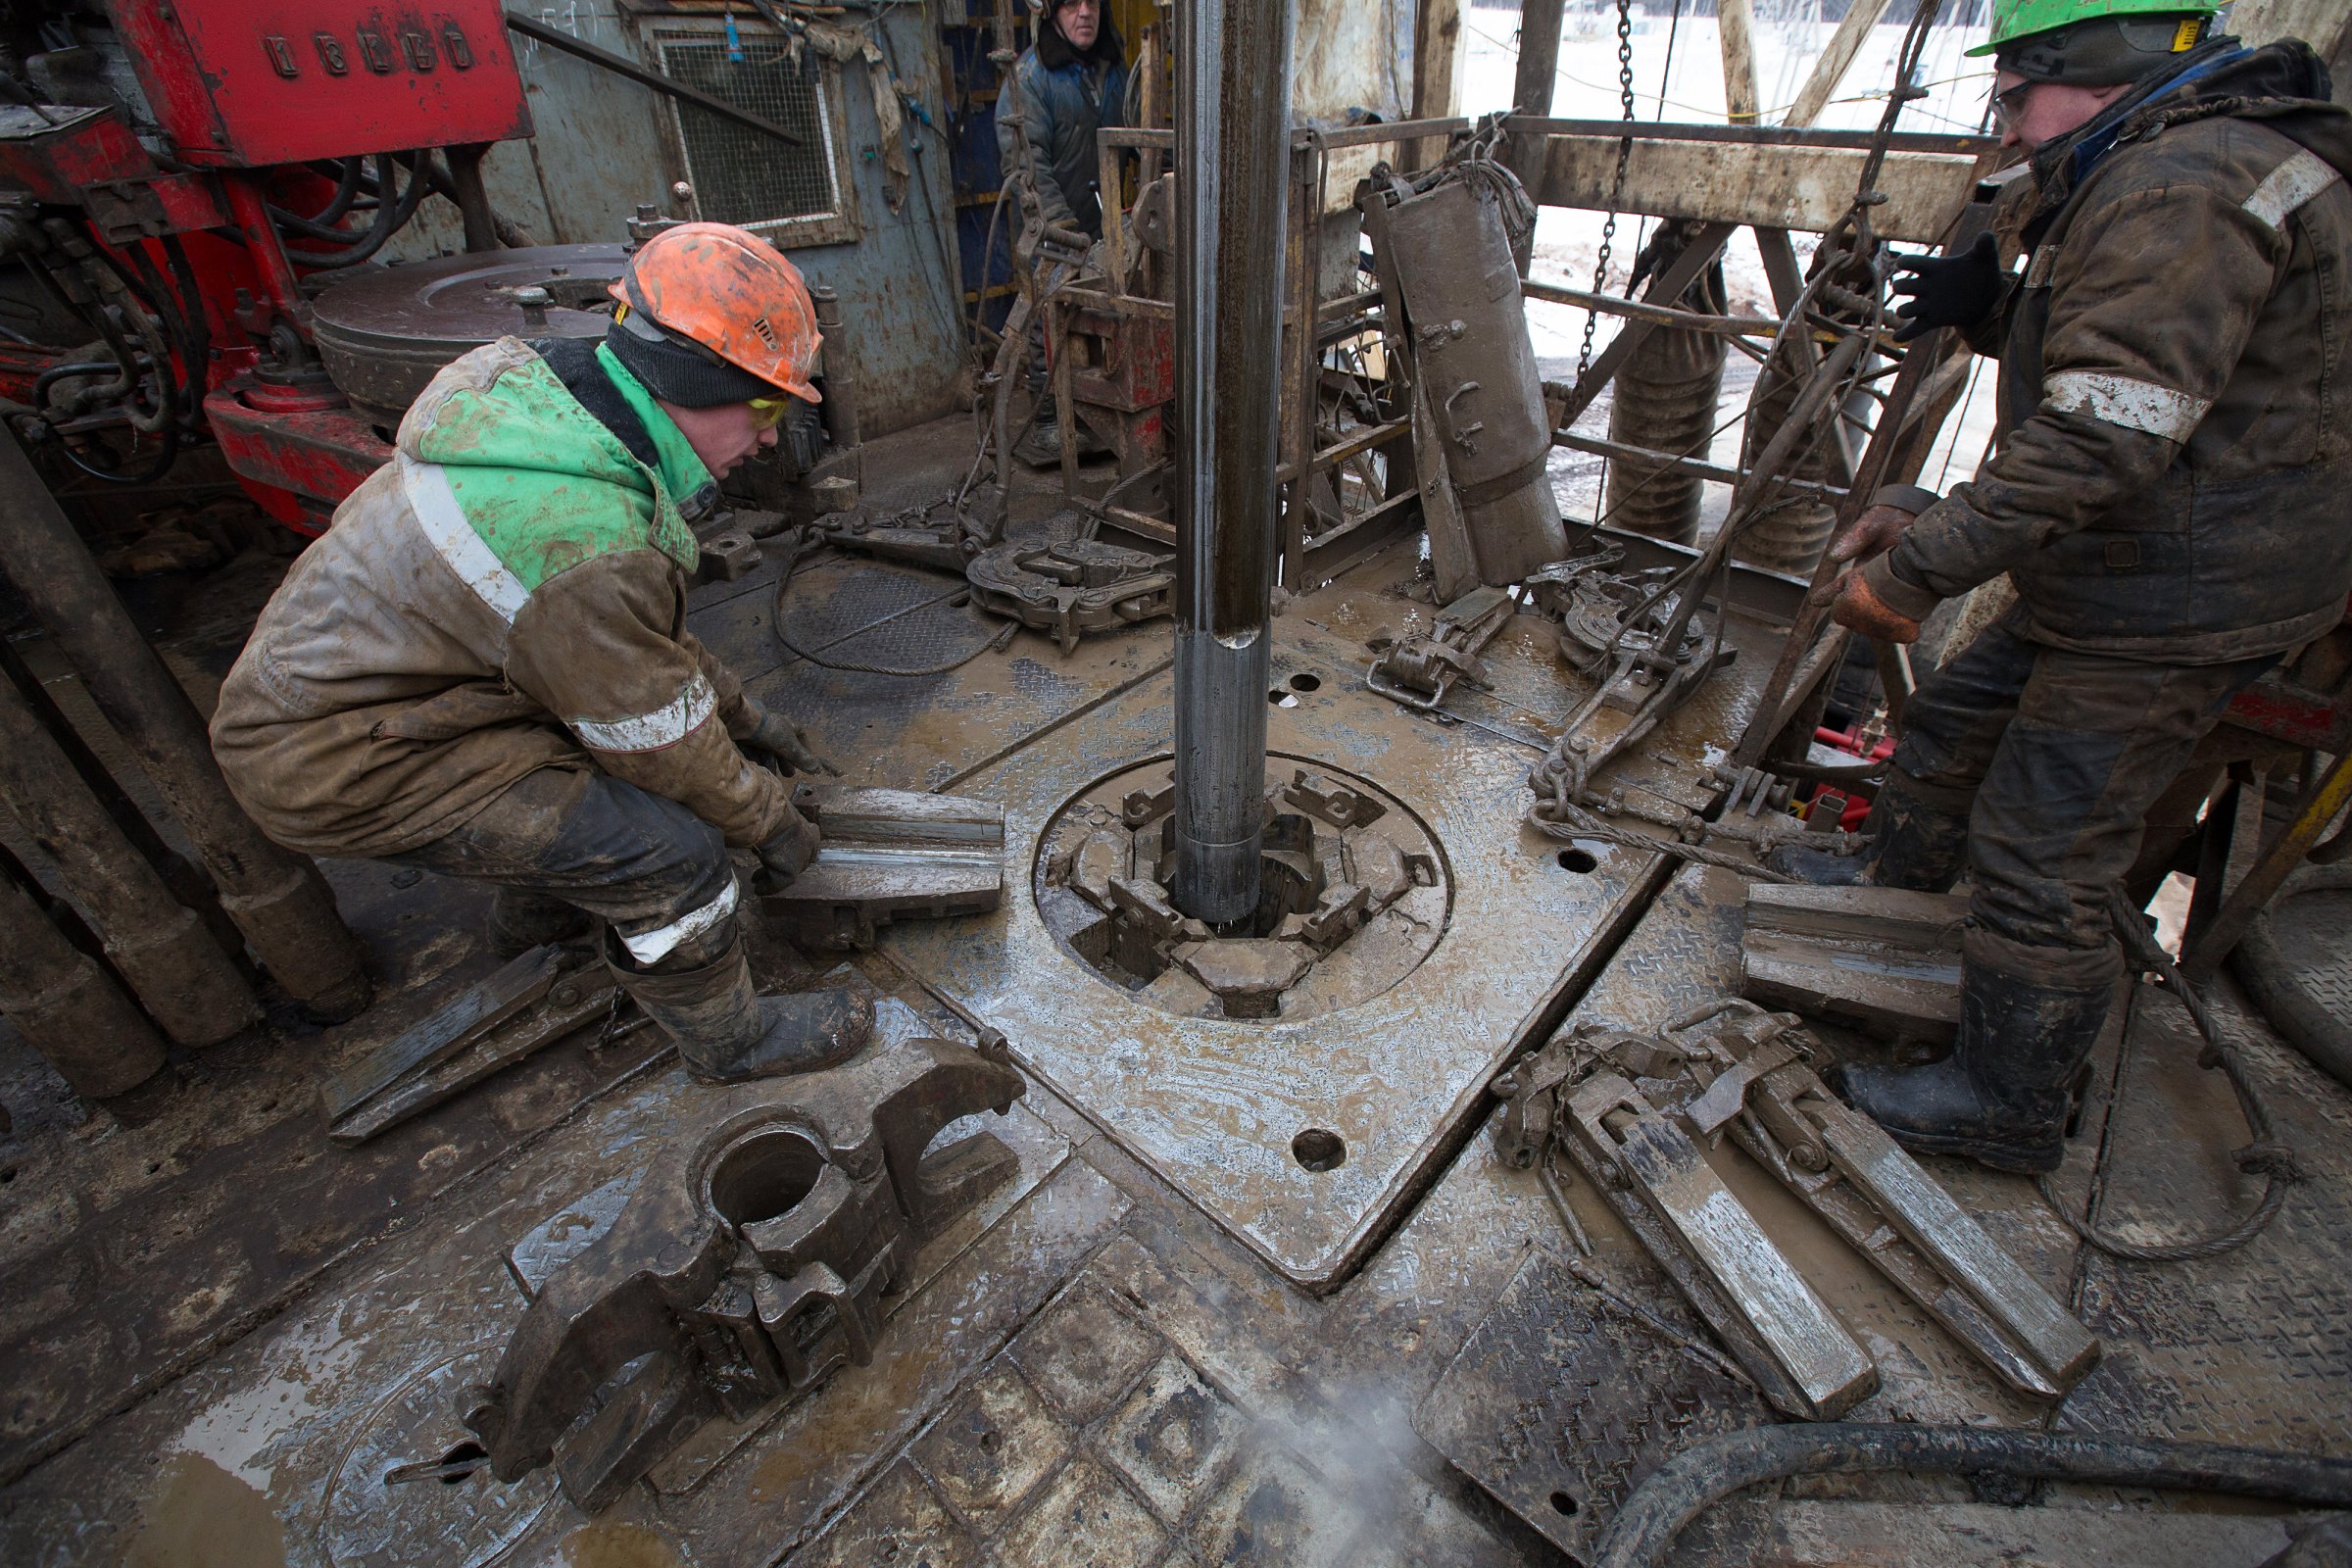 Oil workers adjust a pipe section at the turntable on an oil derrick during drilling operations by Targin JSC, a unit of Sistema JSFC, in an oilfield operated by Bashneft PAO in the village of Otrada, 150kms from Ufa, Russia, on Saturday, March 5, 2016.